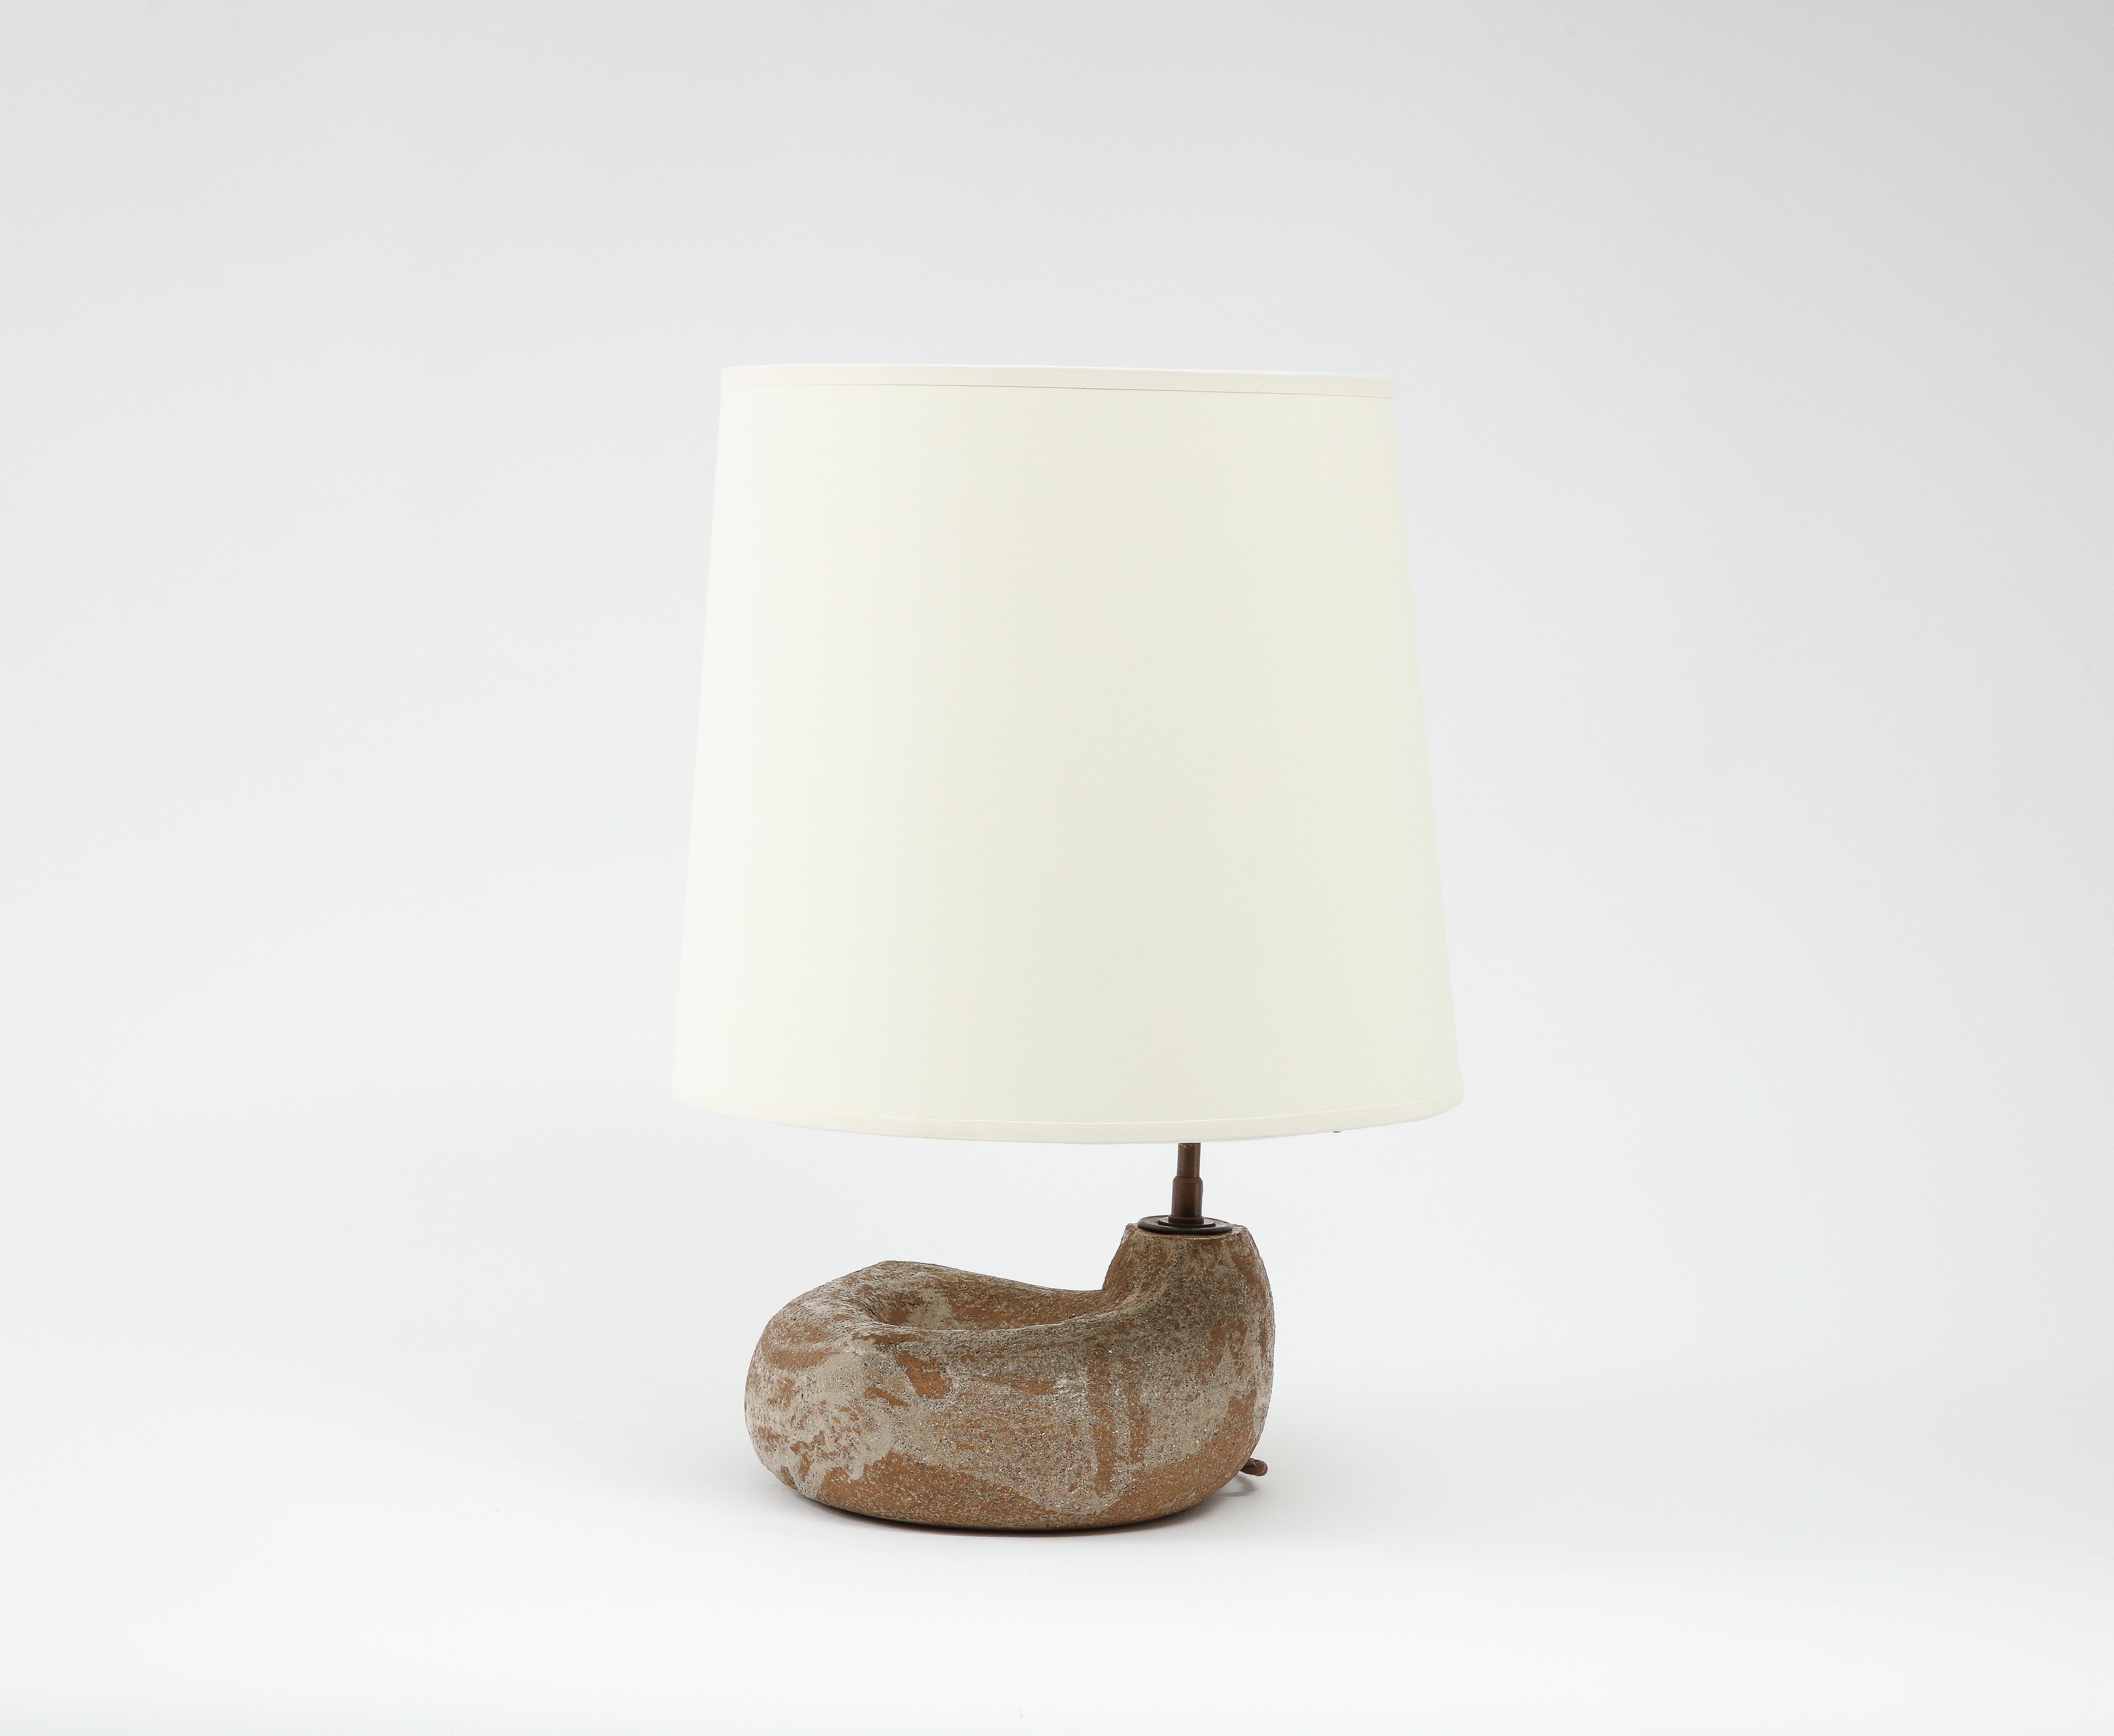 Freeform ceramic lamp, the body in a cup form with an offset stem. Rewired with a silk cord, it comes with a custom shade.